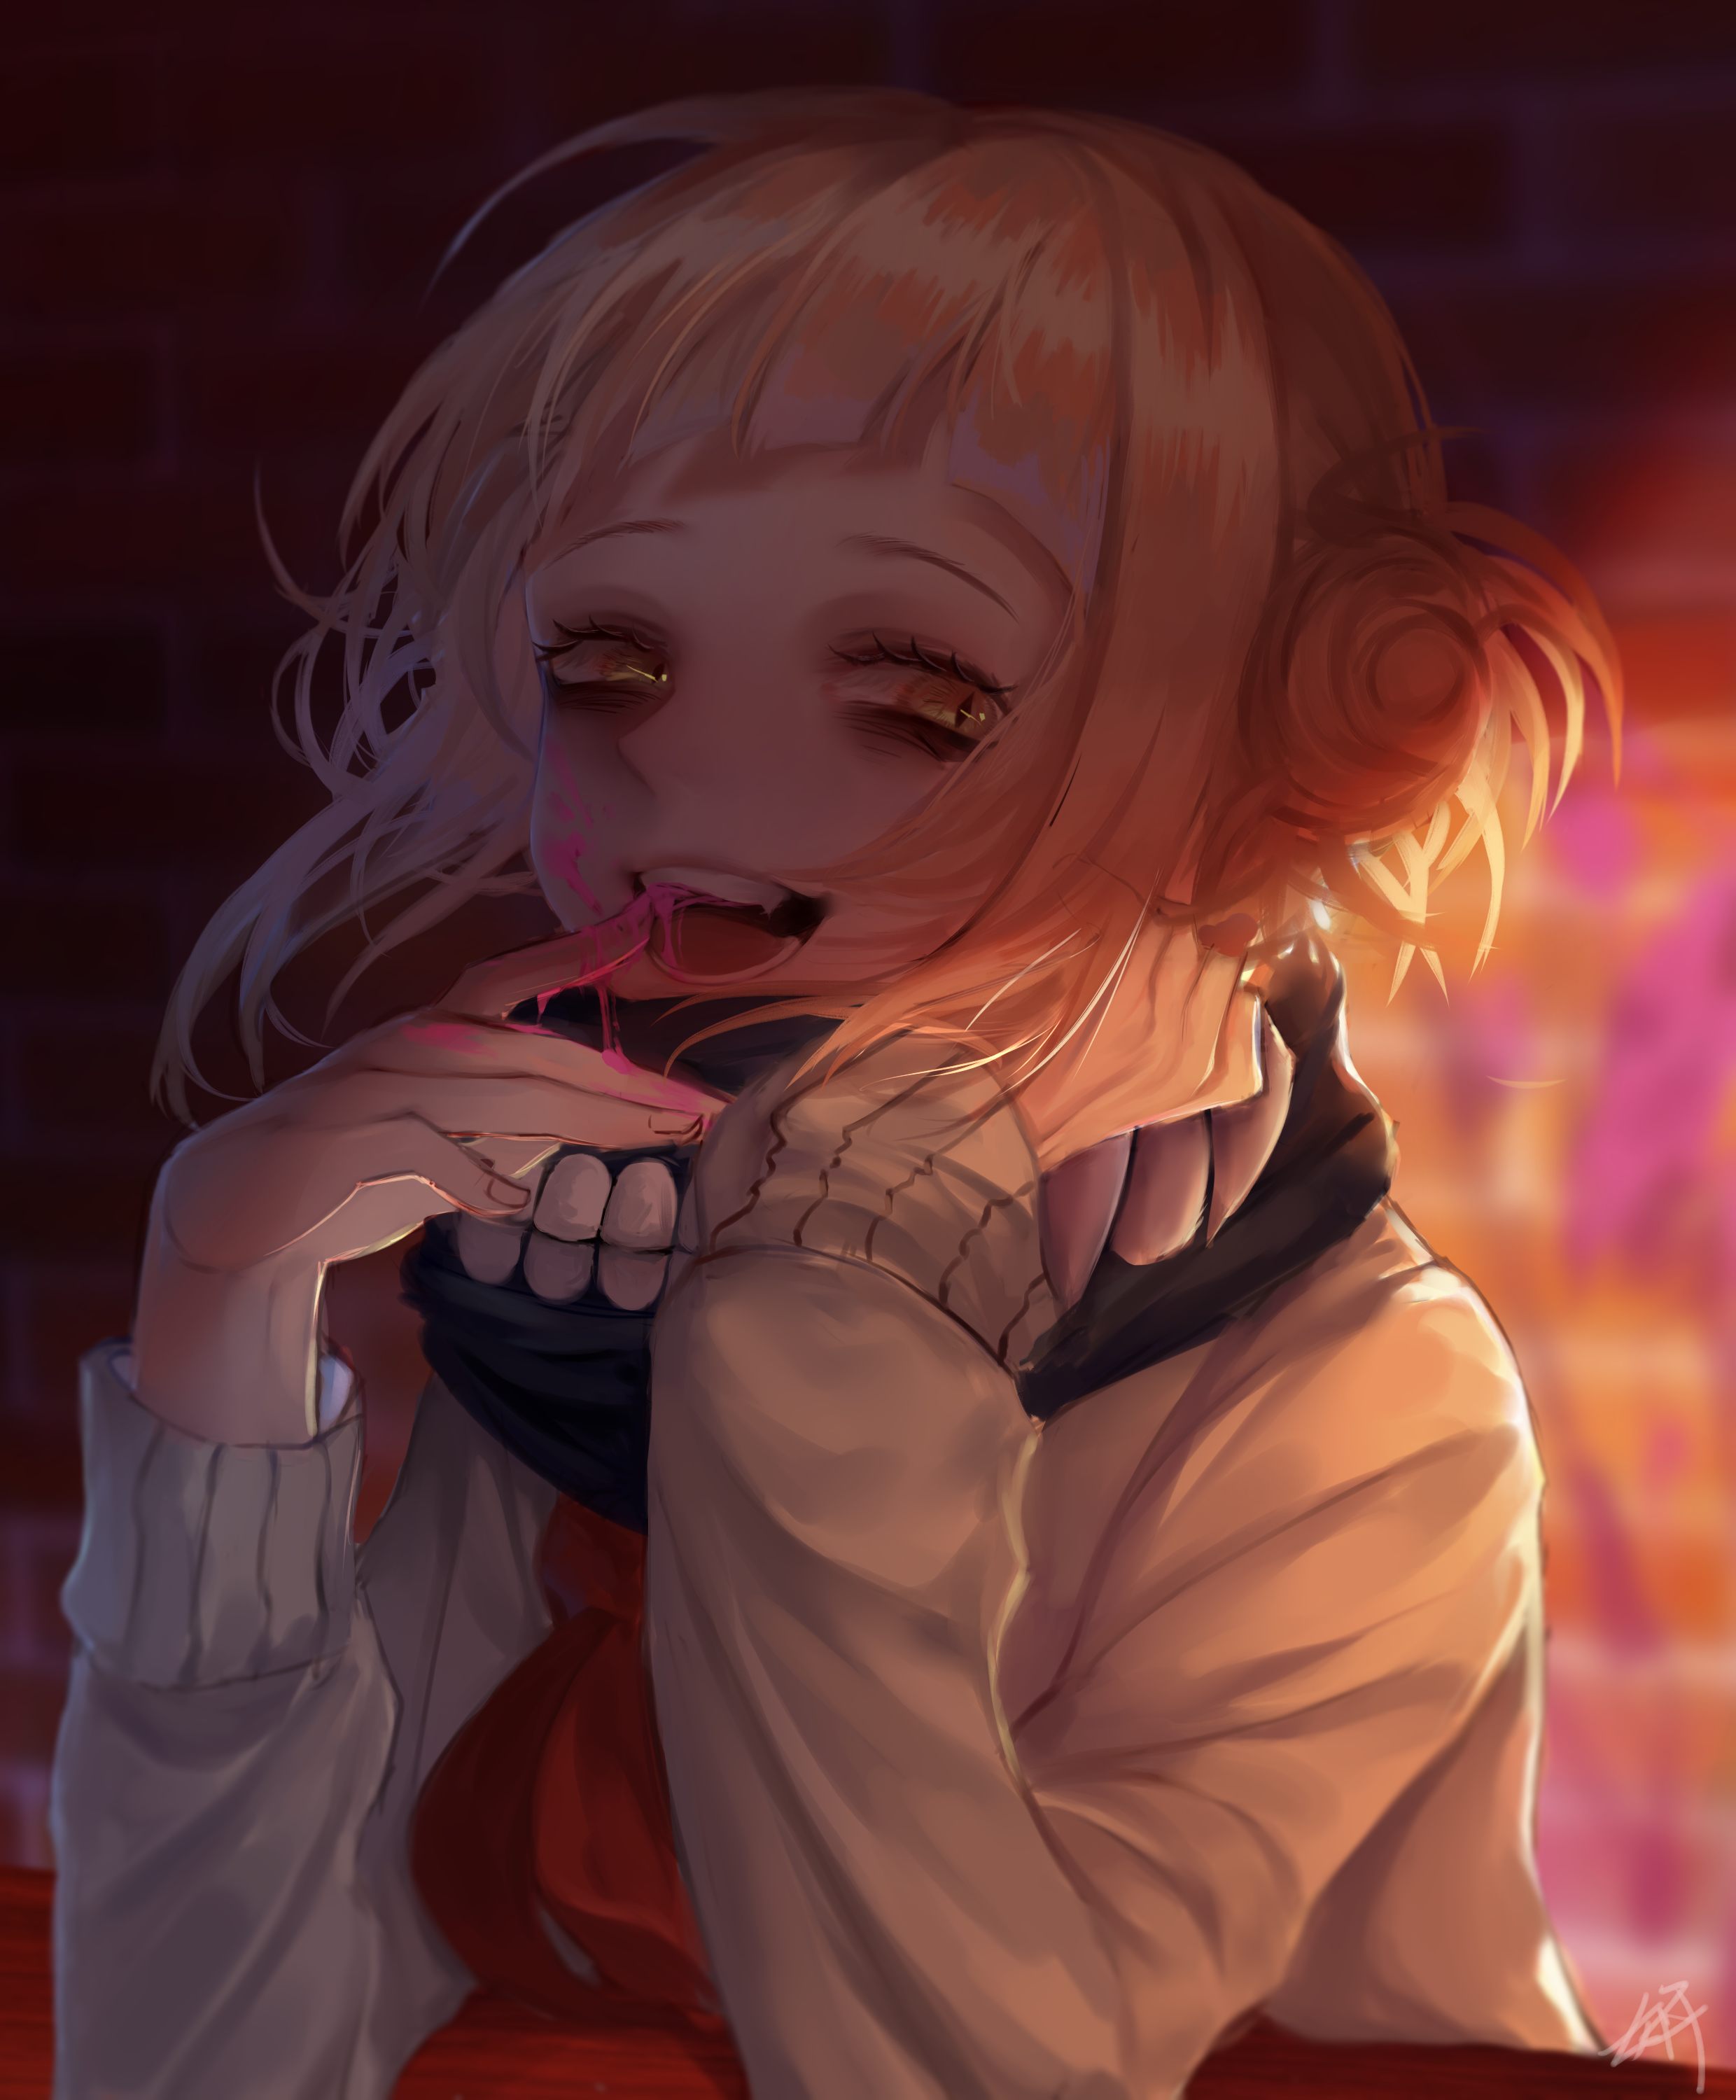 Dress Like Himiko Toga Costume  Halloween and Cosplay Guides